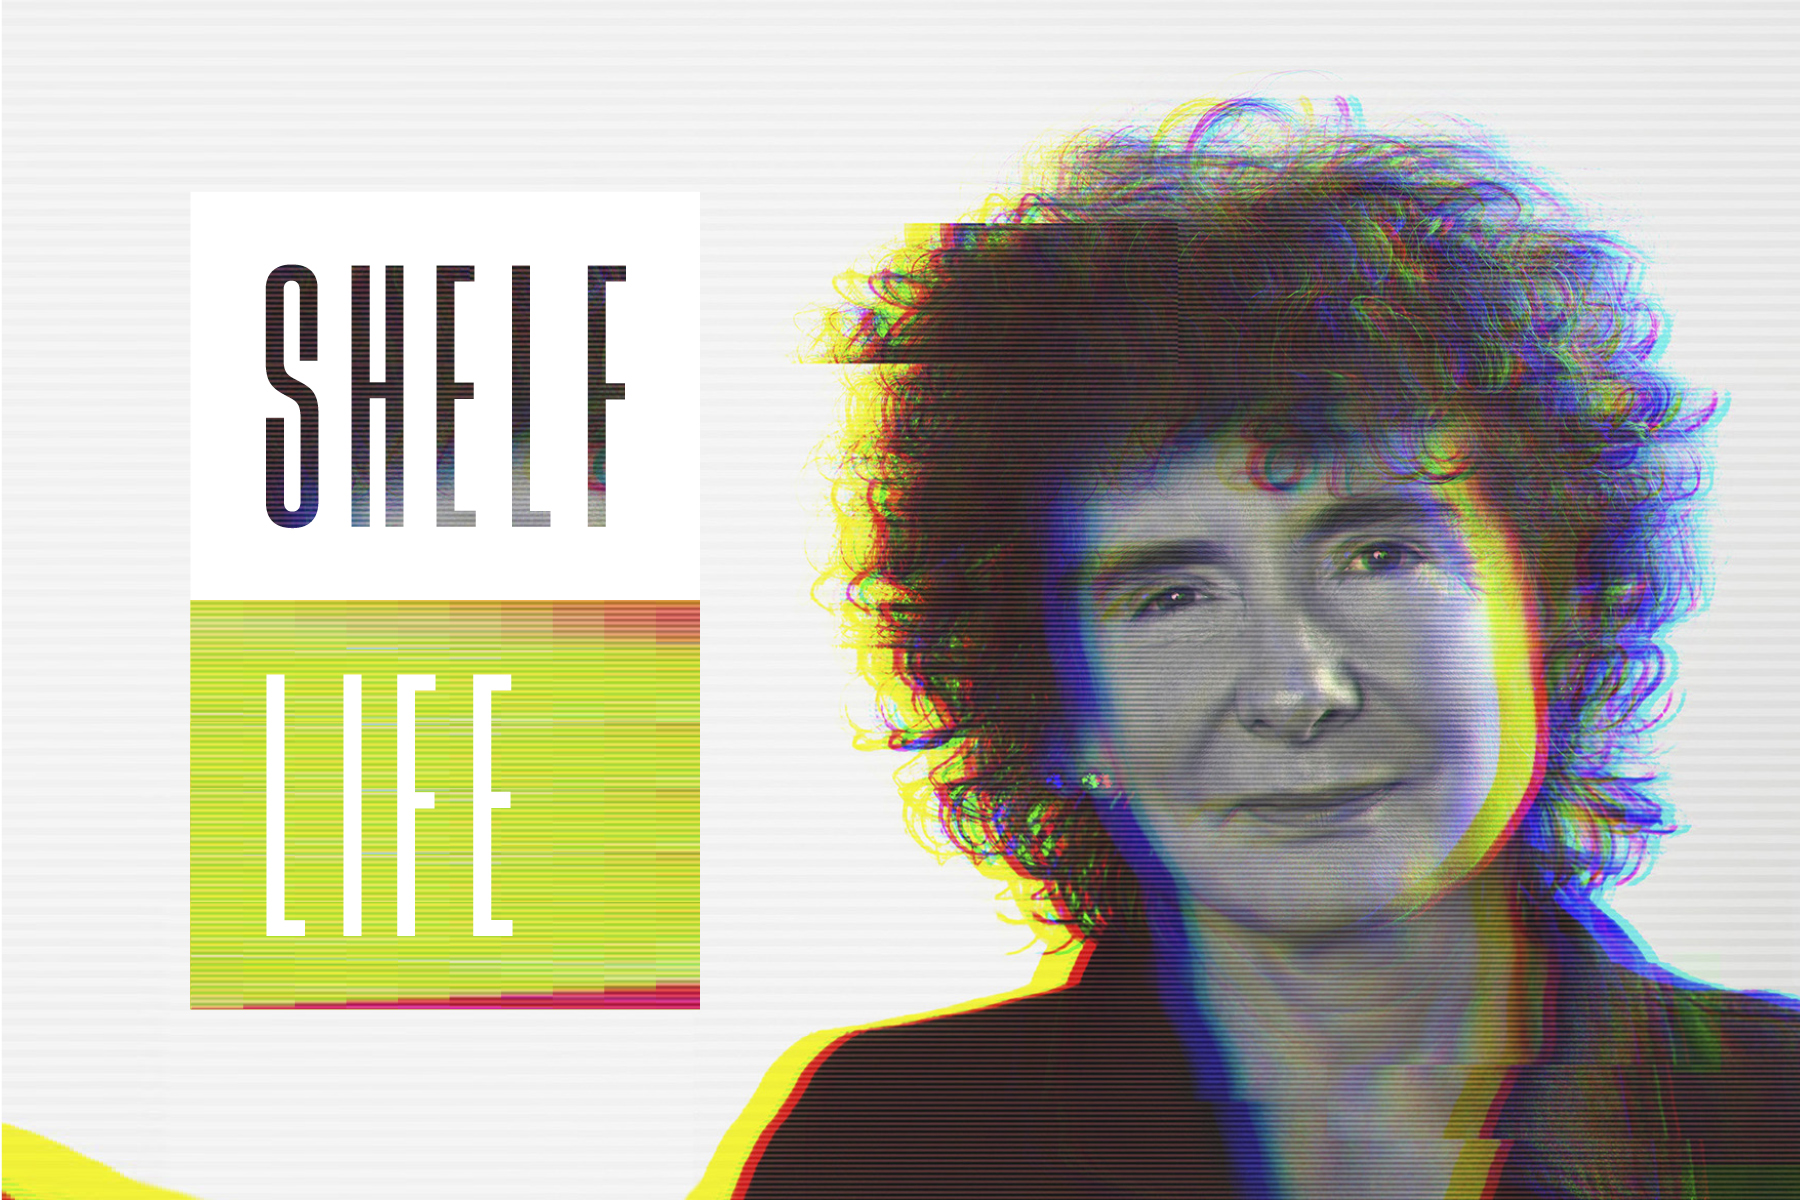 A black-and-white photograph of Jeanette Winterson's head and shoulders